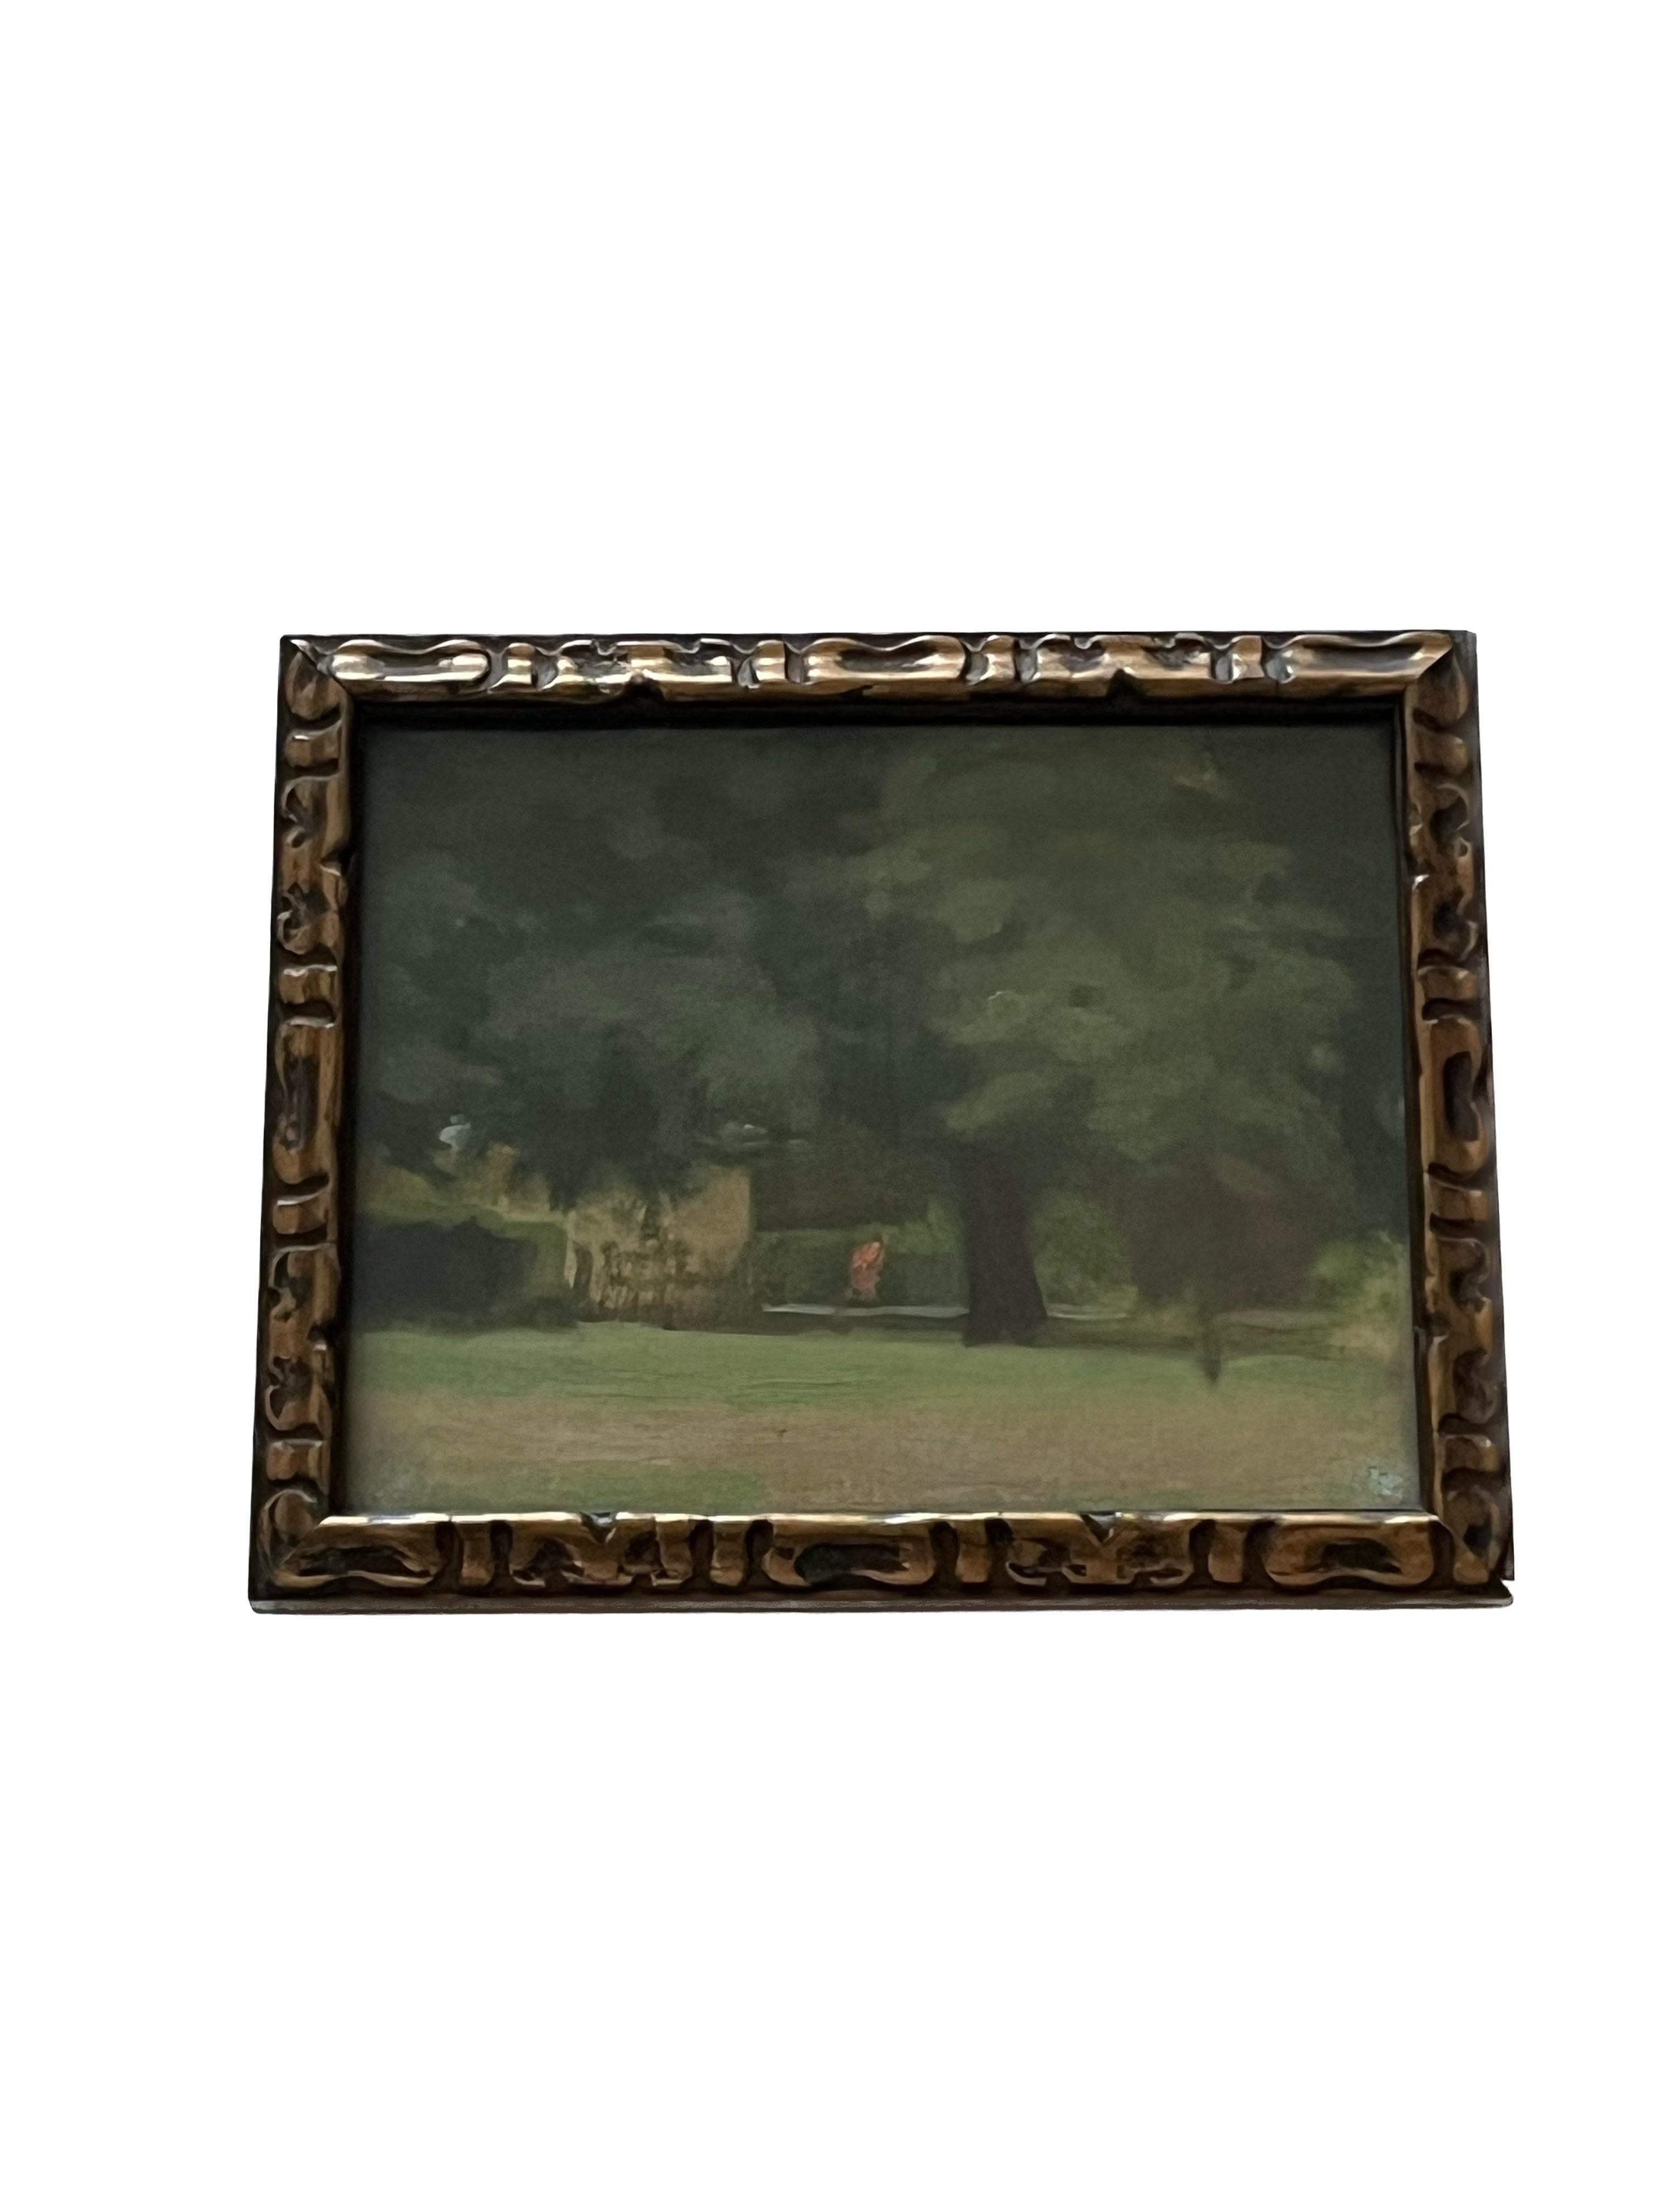 Circle of Paul Maitland, British impressionist, Figure walking in a London park For Sale 1